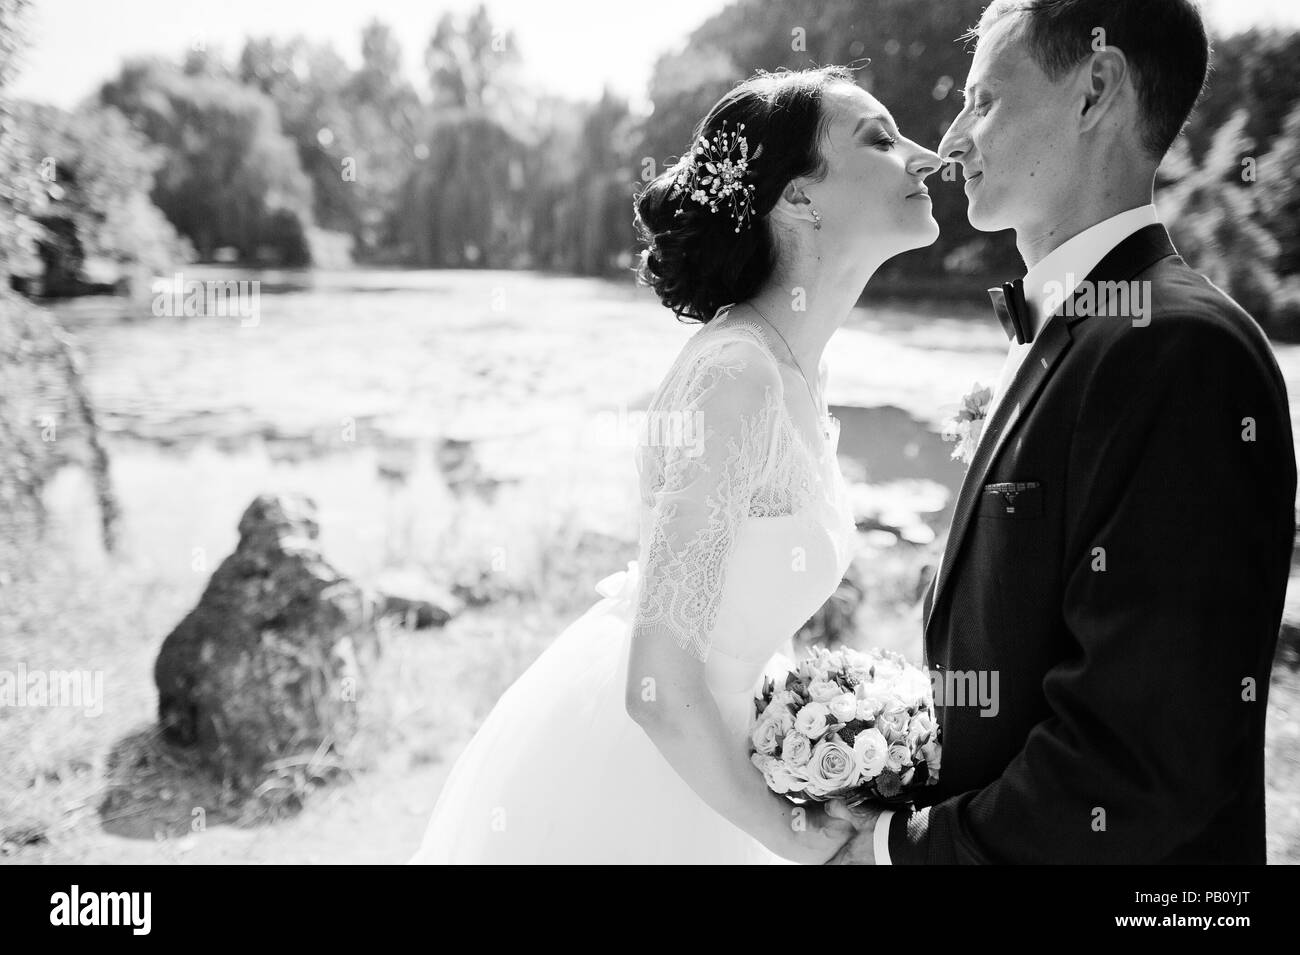 Wedding couple walking and looking into each other's eyes on the river bank. Black and white photo. Stock Photo